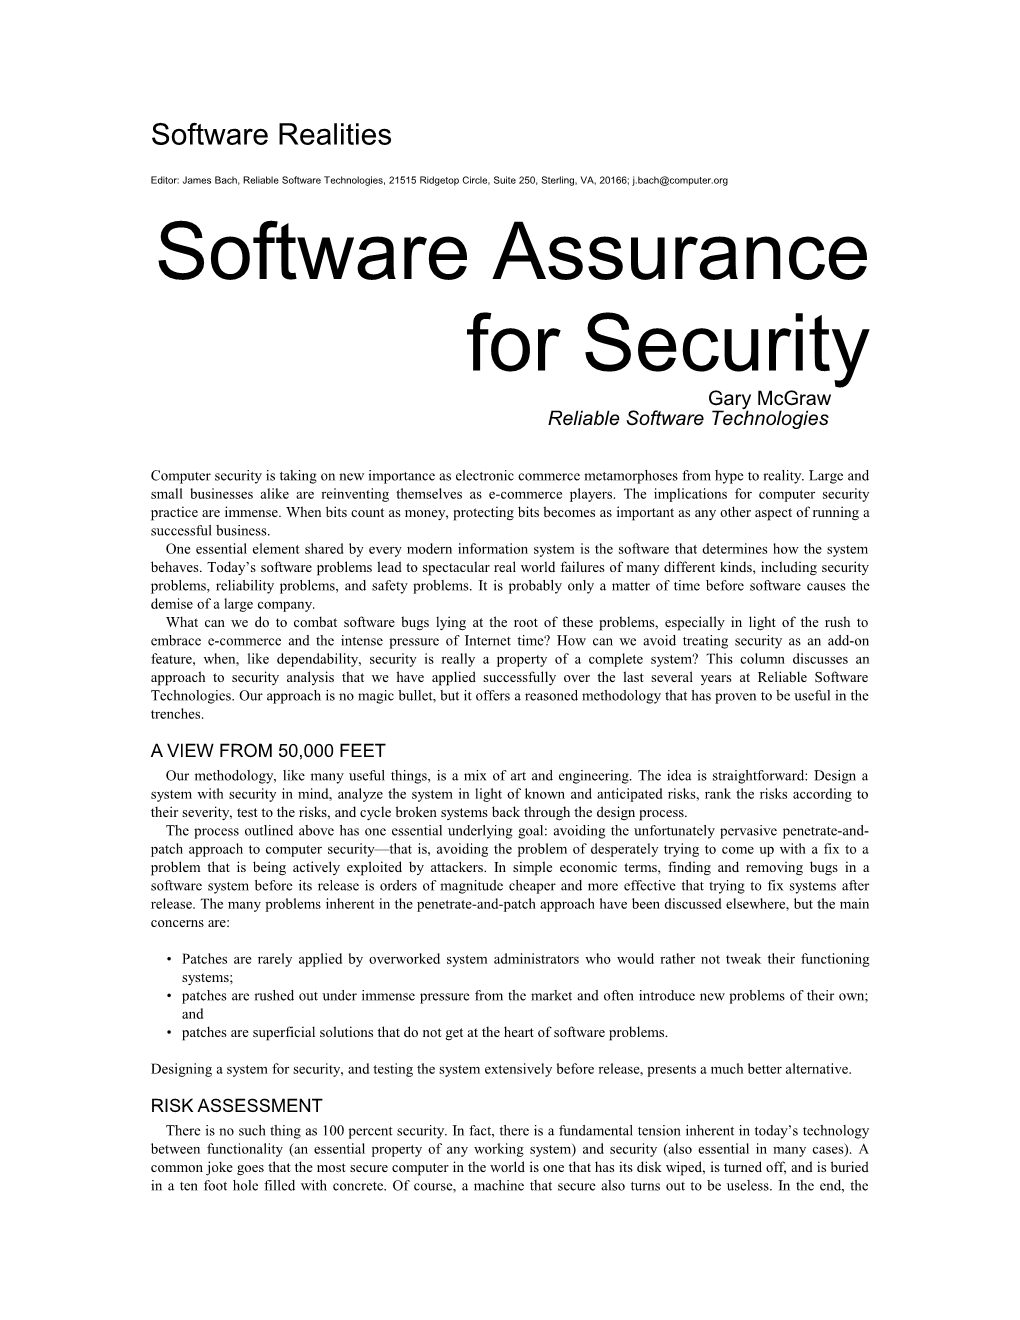 Software Assurance for Security